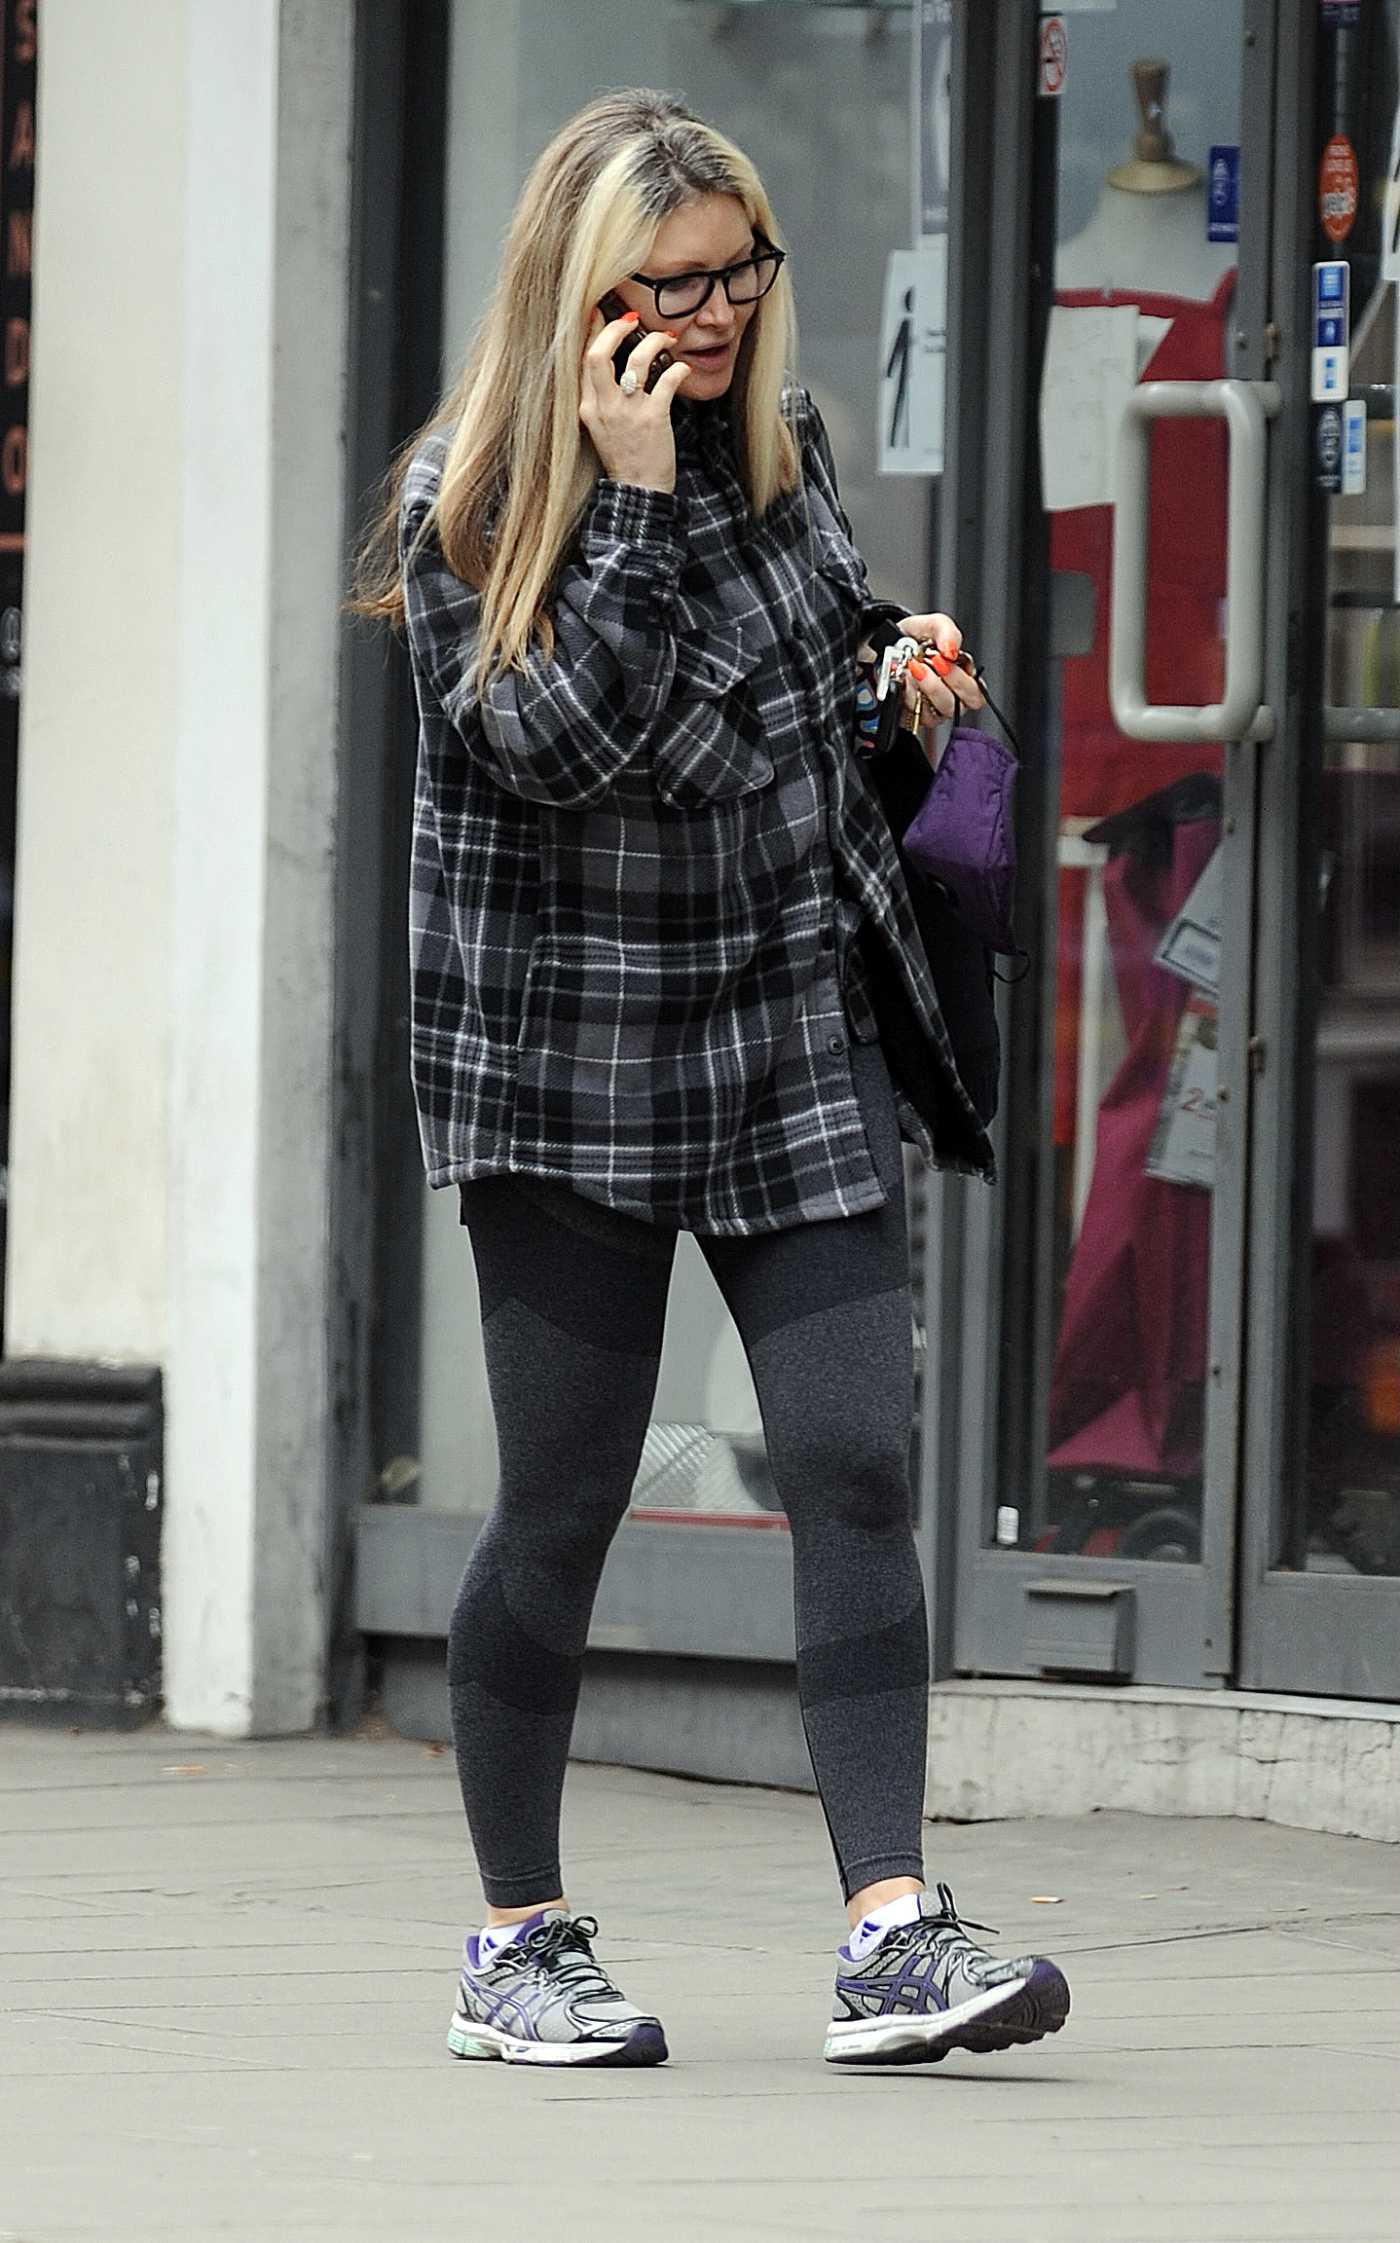 Caprice Bourret in a Black Baggy Check Shirt Was Seen Out in London 03/23/2021